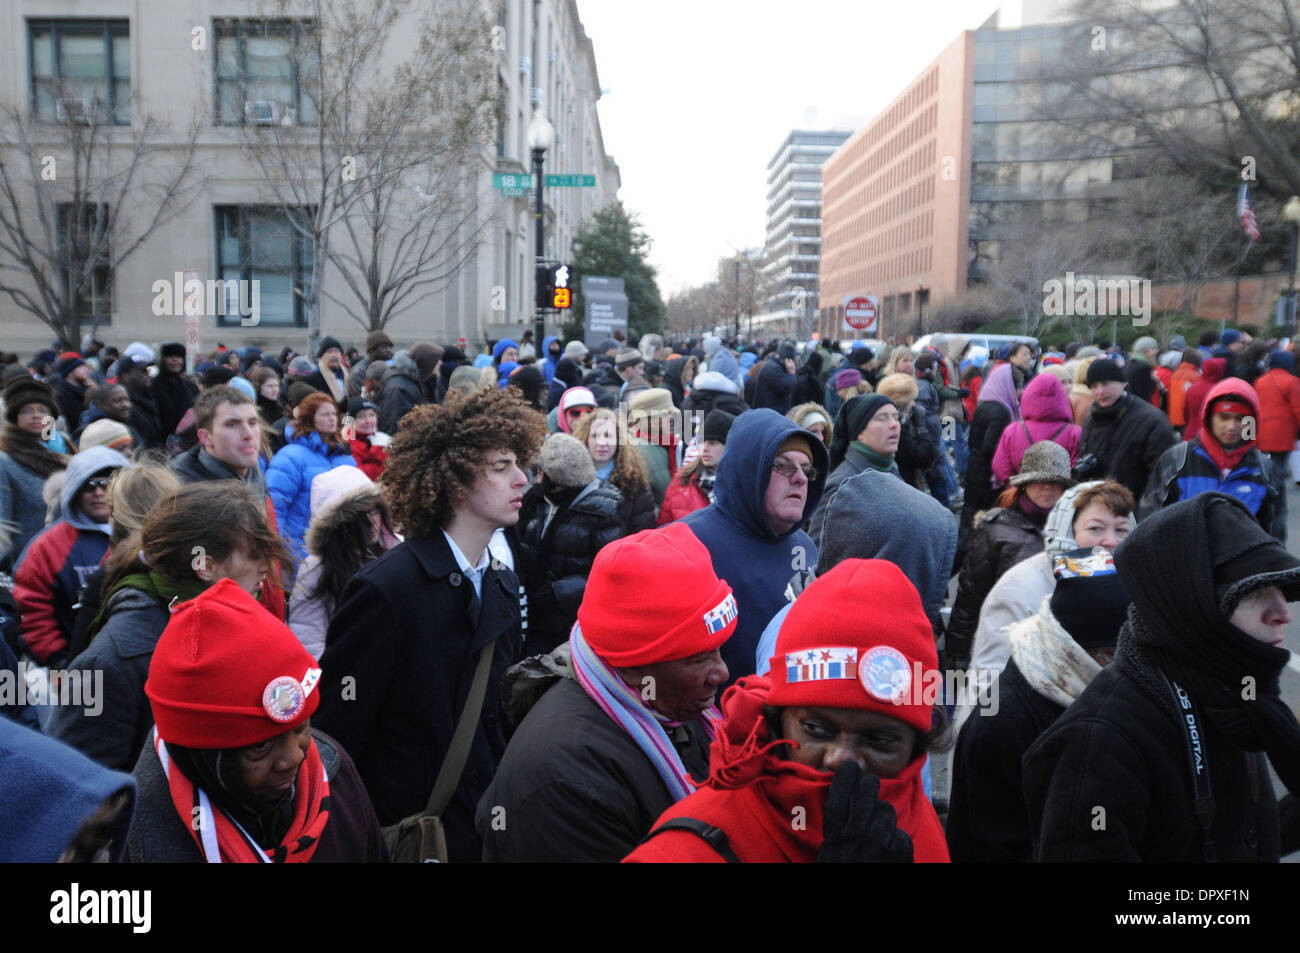 Jan 20, 2009 - Washington, District of Columbia, USA - A sea of people walk through the streets after the historic inauguration of Obama as the 44th president of the United States.  (Credit Image: © Laura Segall/ZUMA Press) Stock Photo